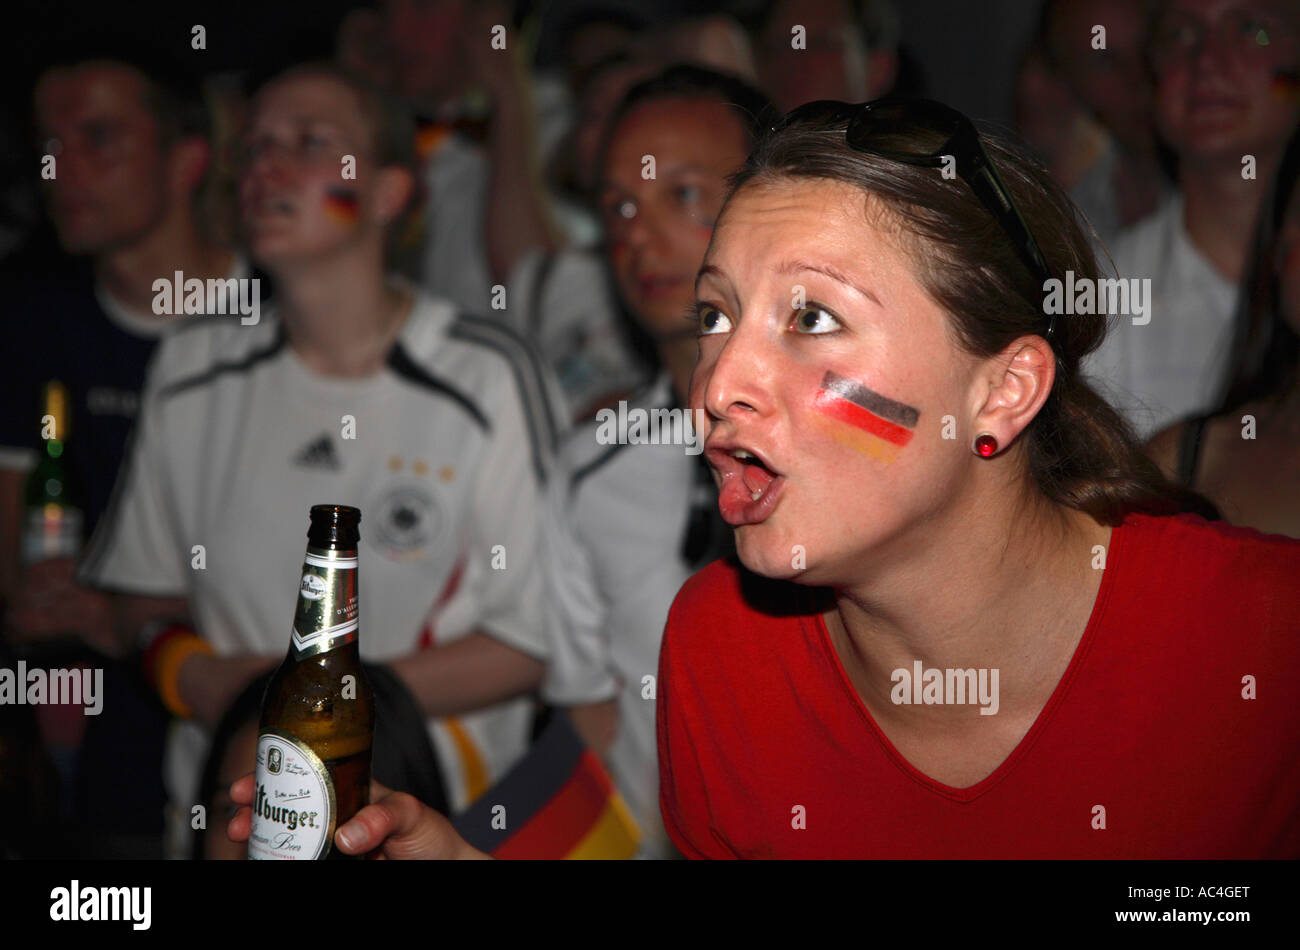 German fans watching victory vs Sweden, 2006 World Cup Finals, Goethe-Institute, London Stock Photo